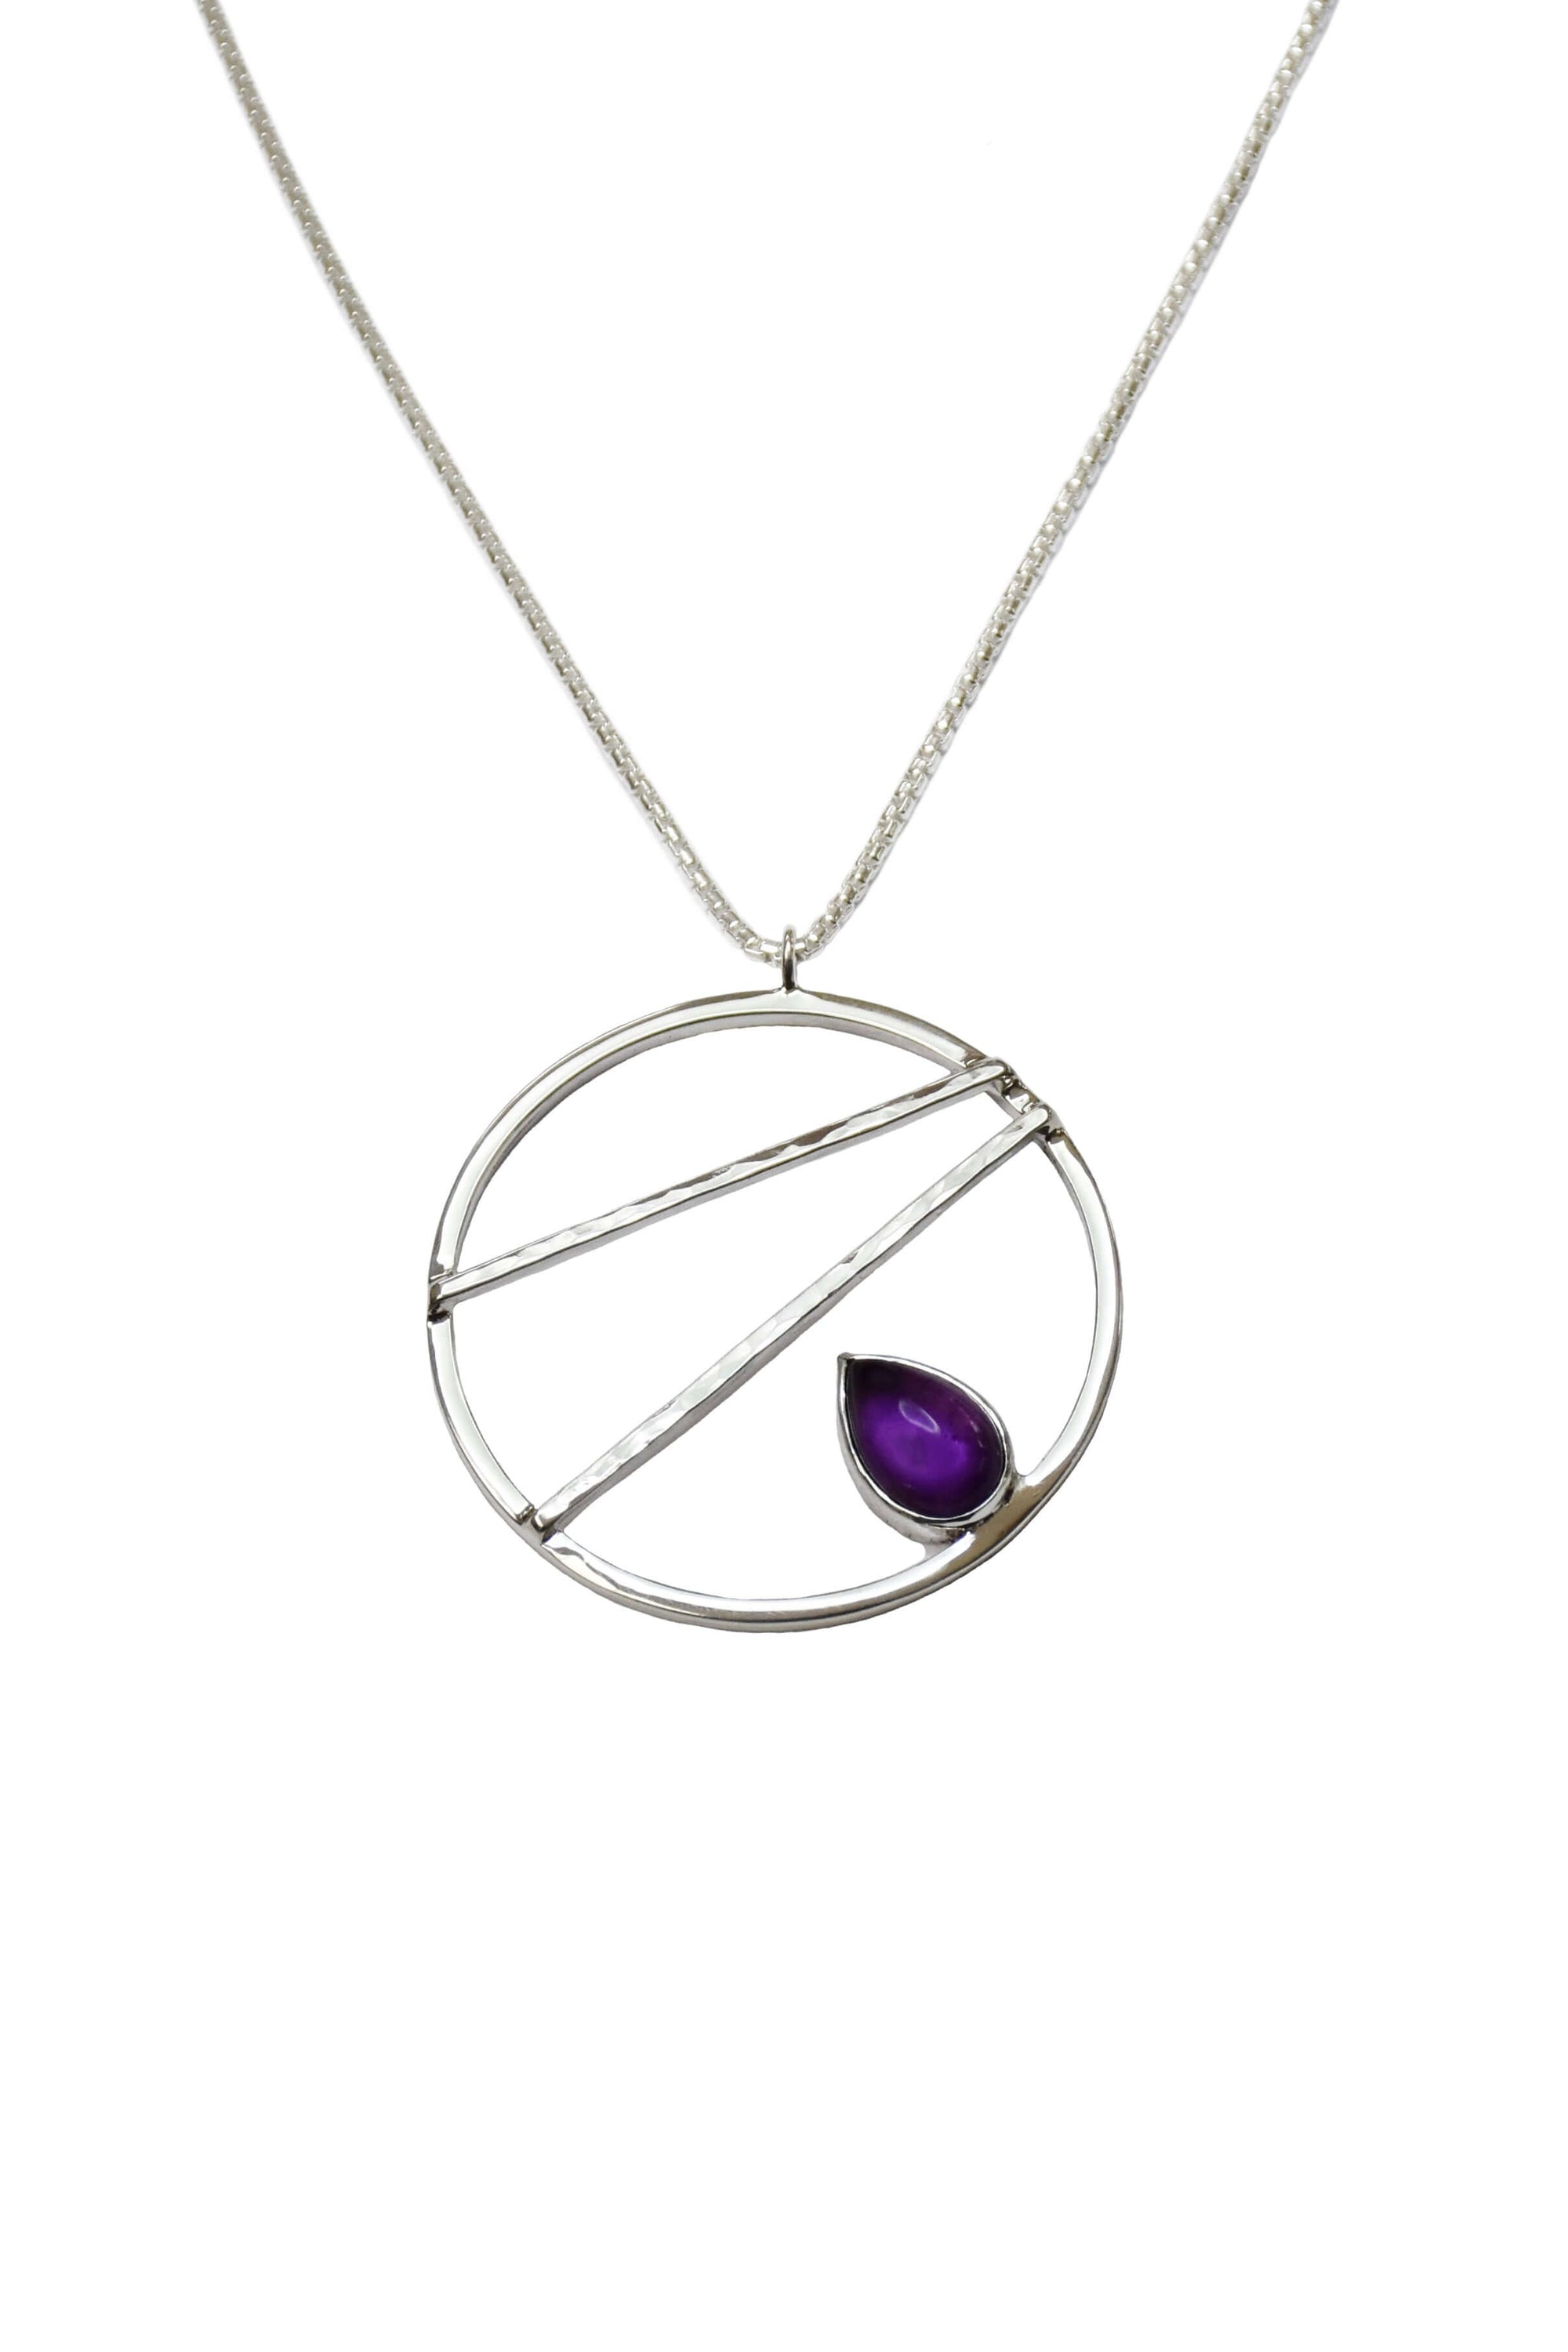 sterling silver crossbar necklace with amethyst on a silver chain